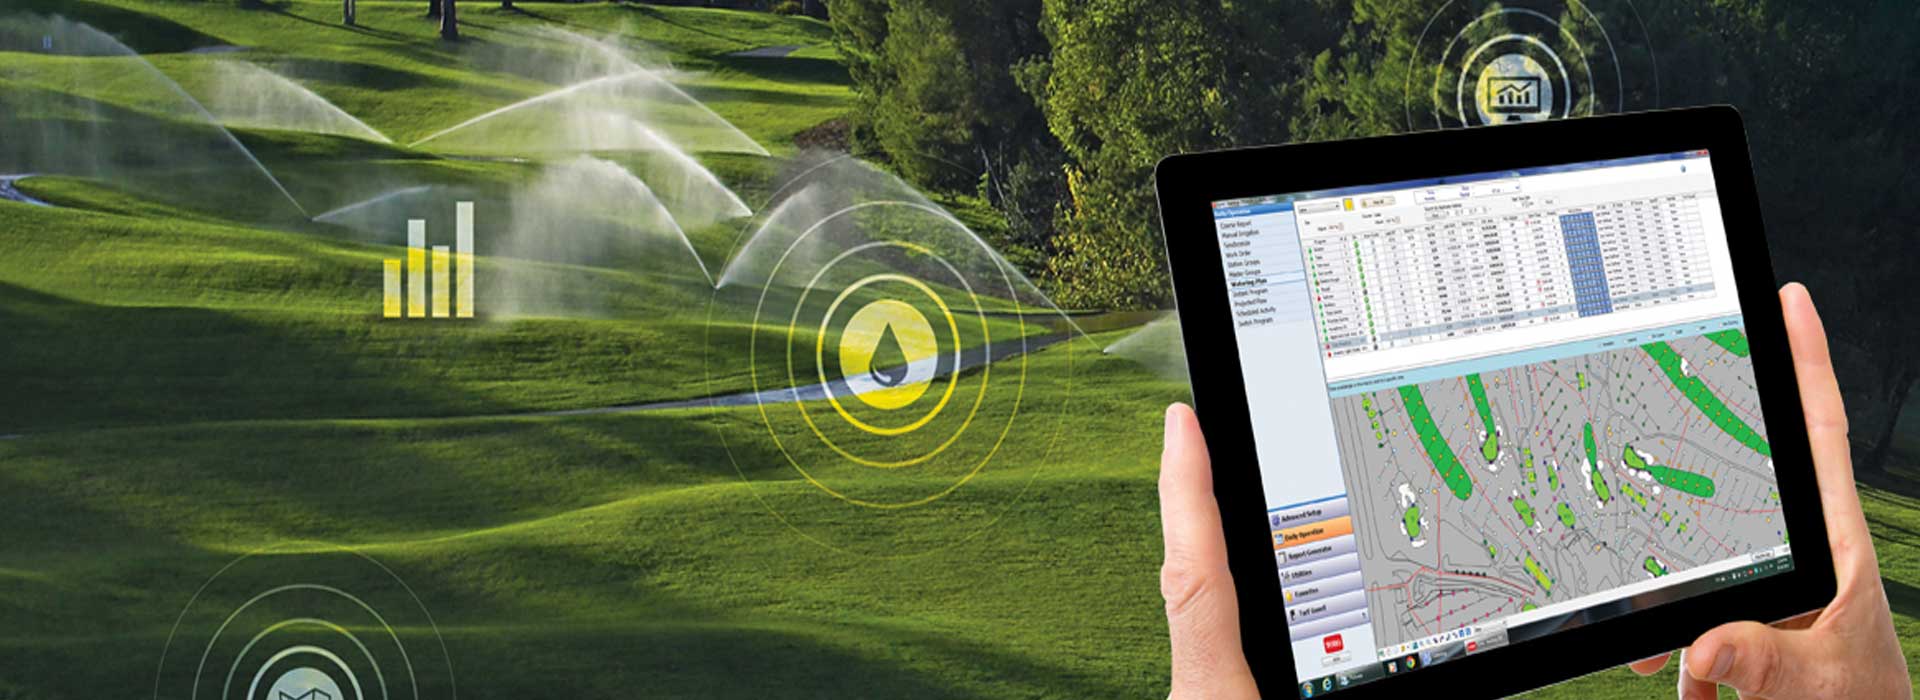 Irrigation Products for All